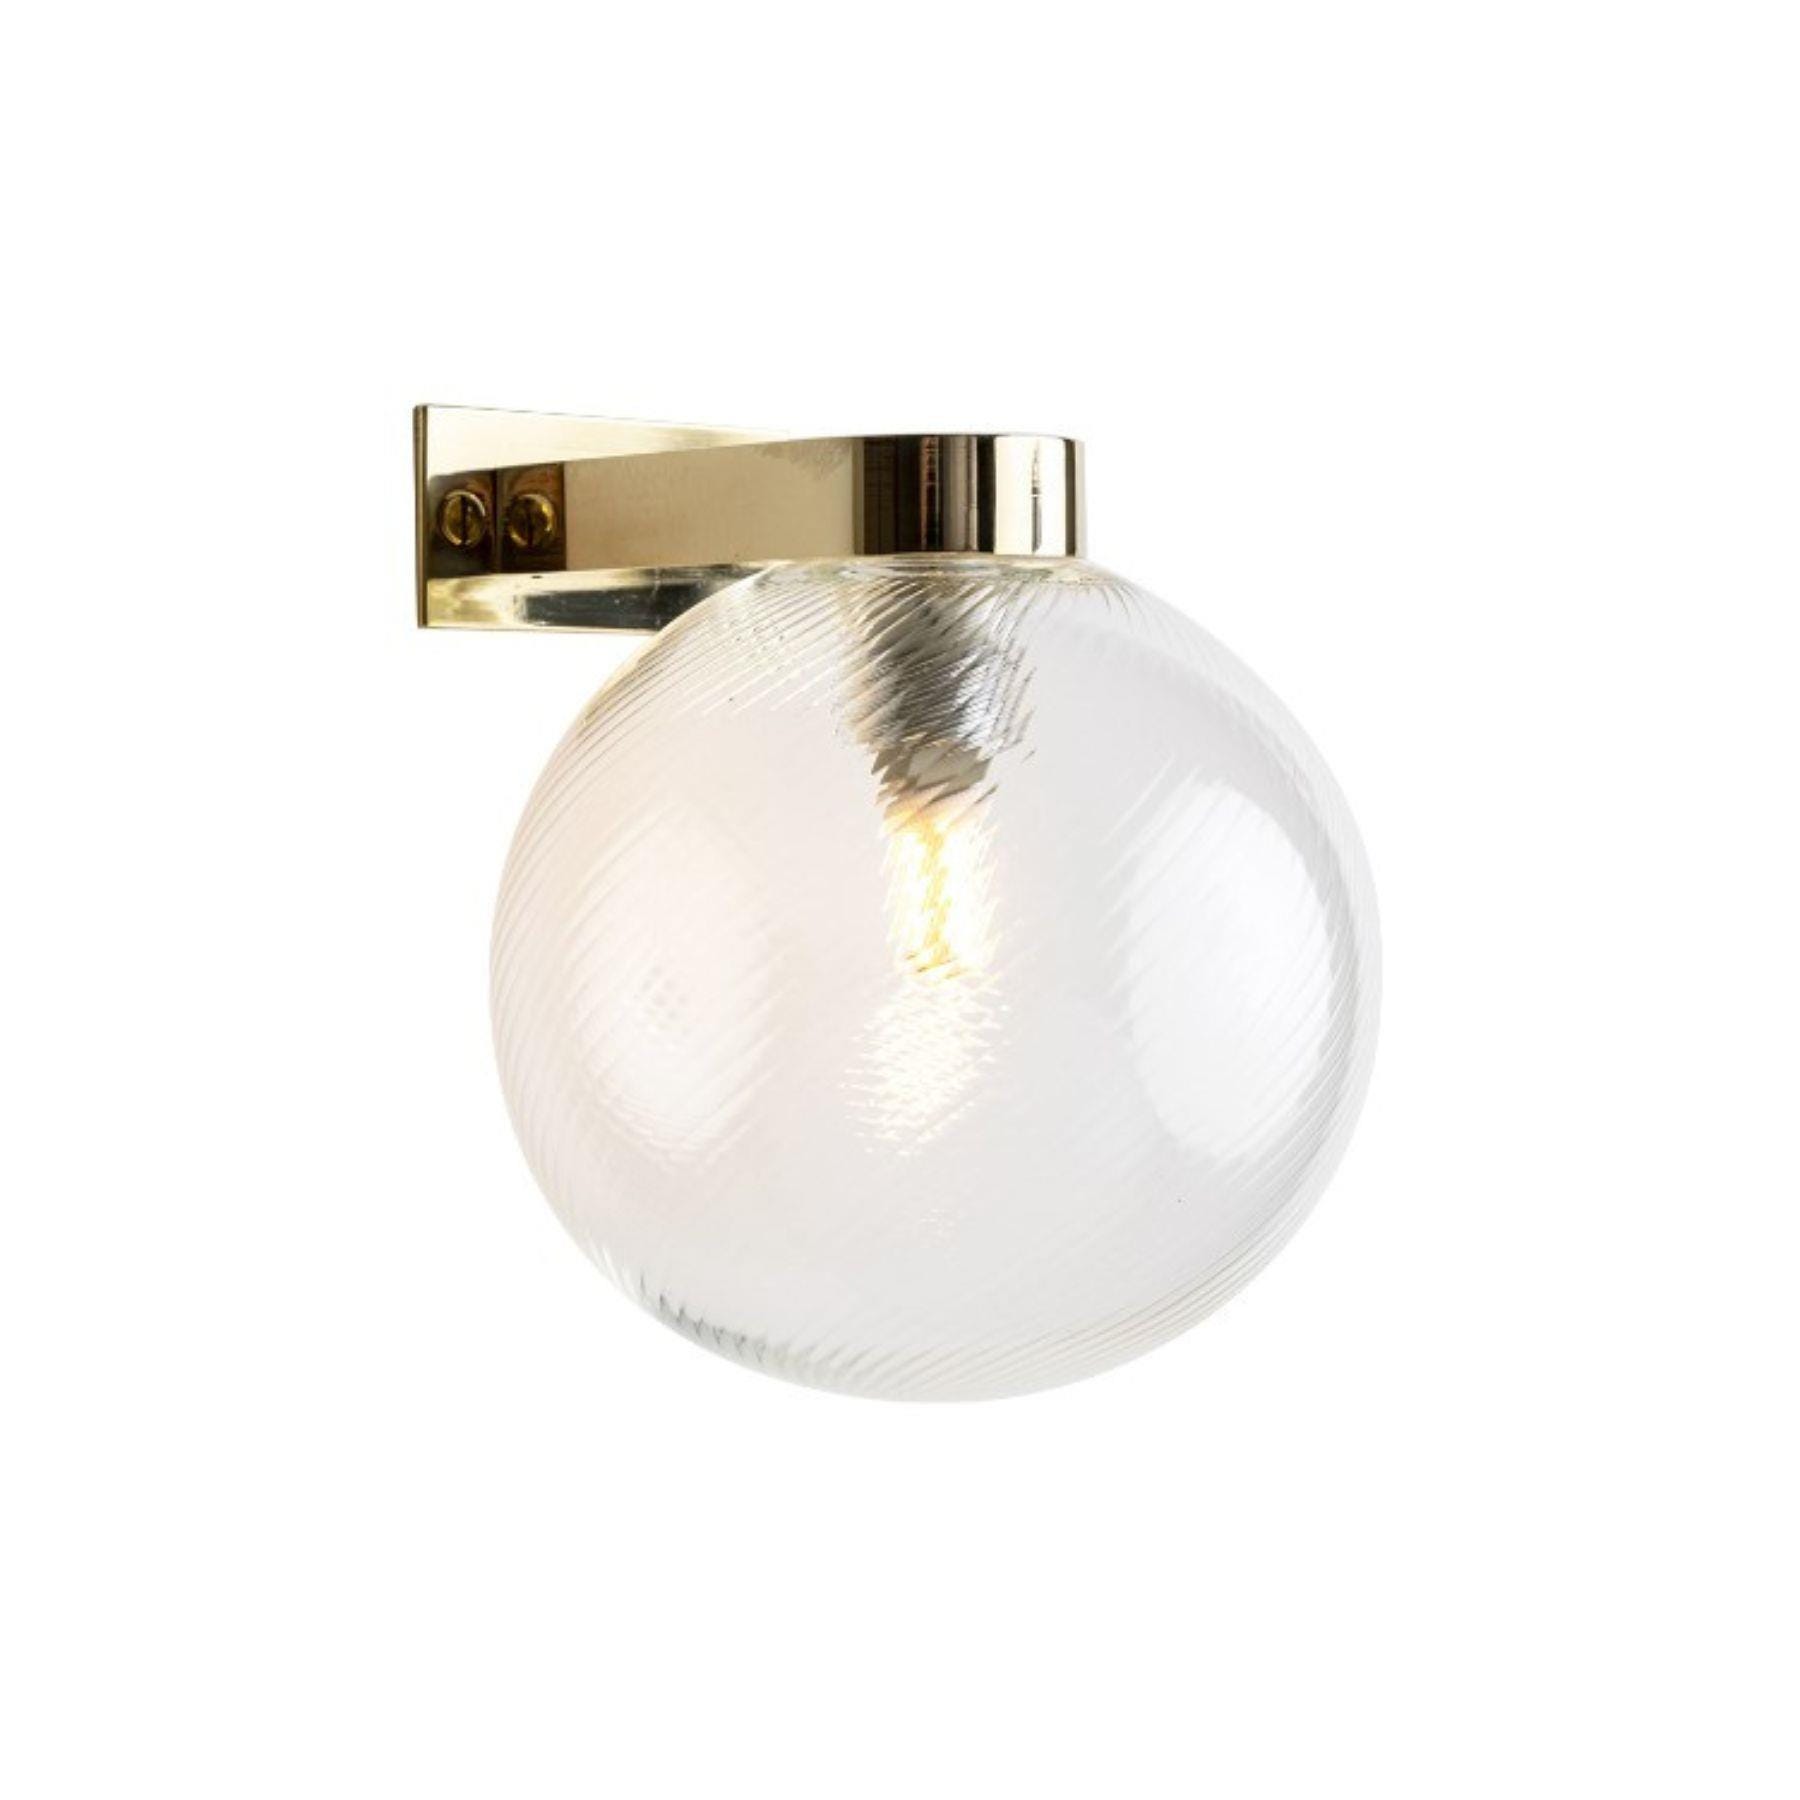 Leverint Pimlico Deco Wall Light Ribbed Wall Lighting Clear